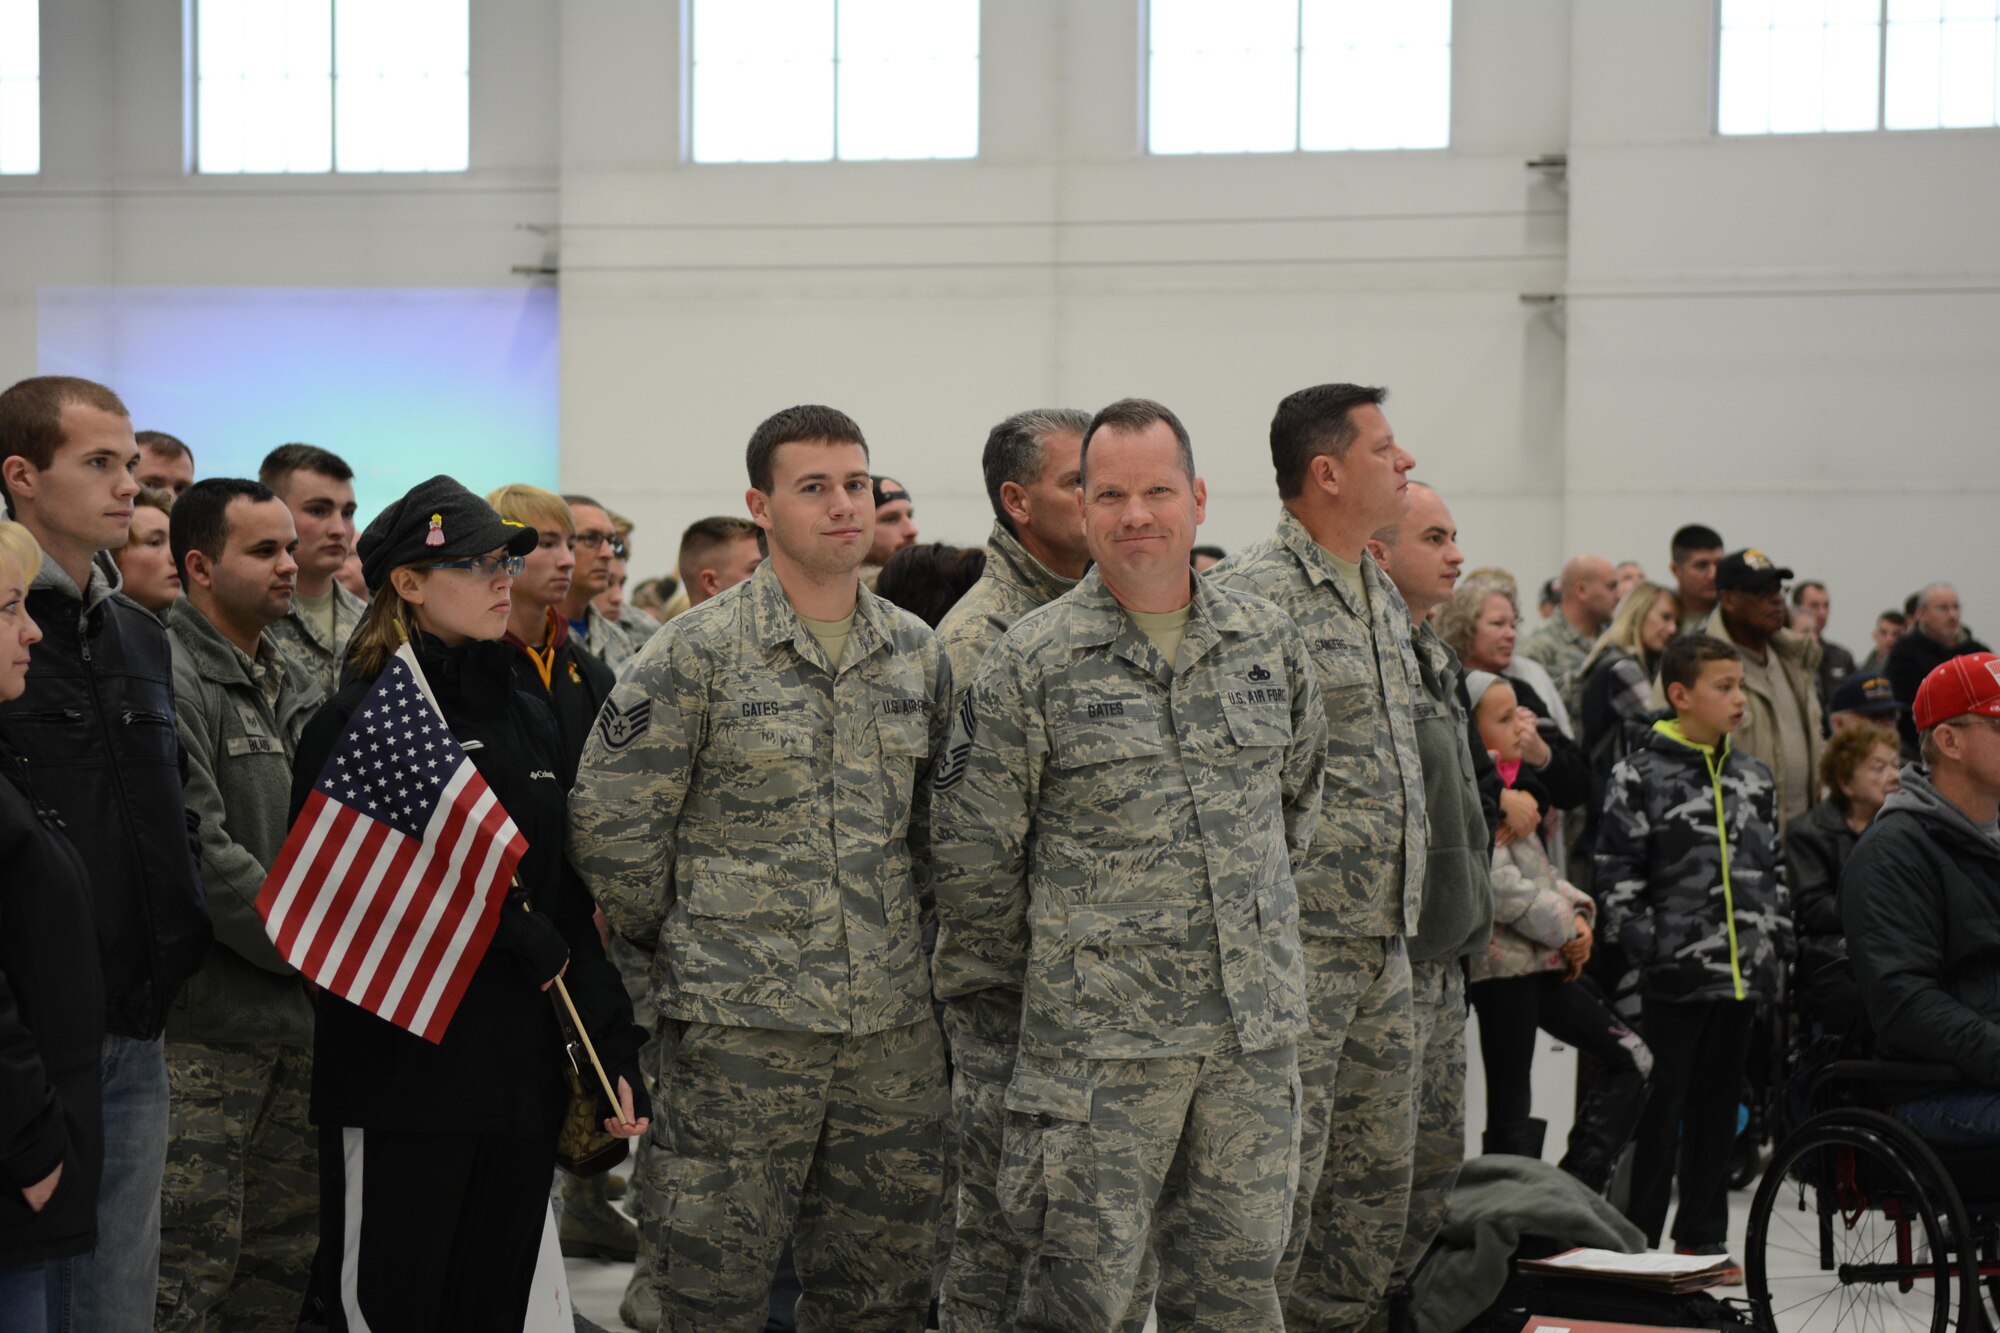 Airmen of the 115th Fighter Wing Airmen were welcomed home by family and friends in a ceremony held today at Truax Field in Madison, Wis. November 8, 2017.  Approximately 270 Airmen and 12  F-16 Fighting Falcons were deployed to Kunsan Air Base, Republic of Korea for three months training under the direction of the 8th Fighter Wing at Kunsan as part of a Pacific Air Force Theater Security Package deployment.